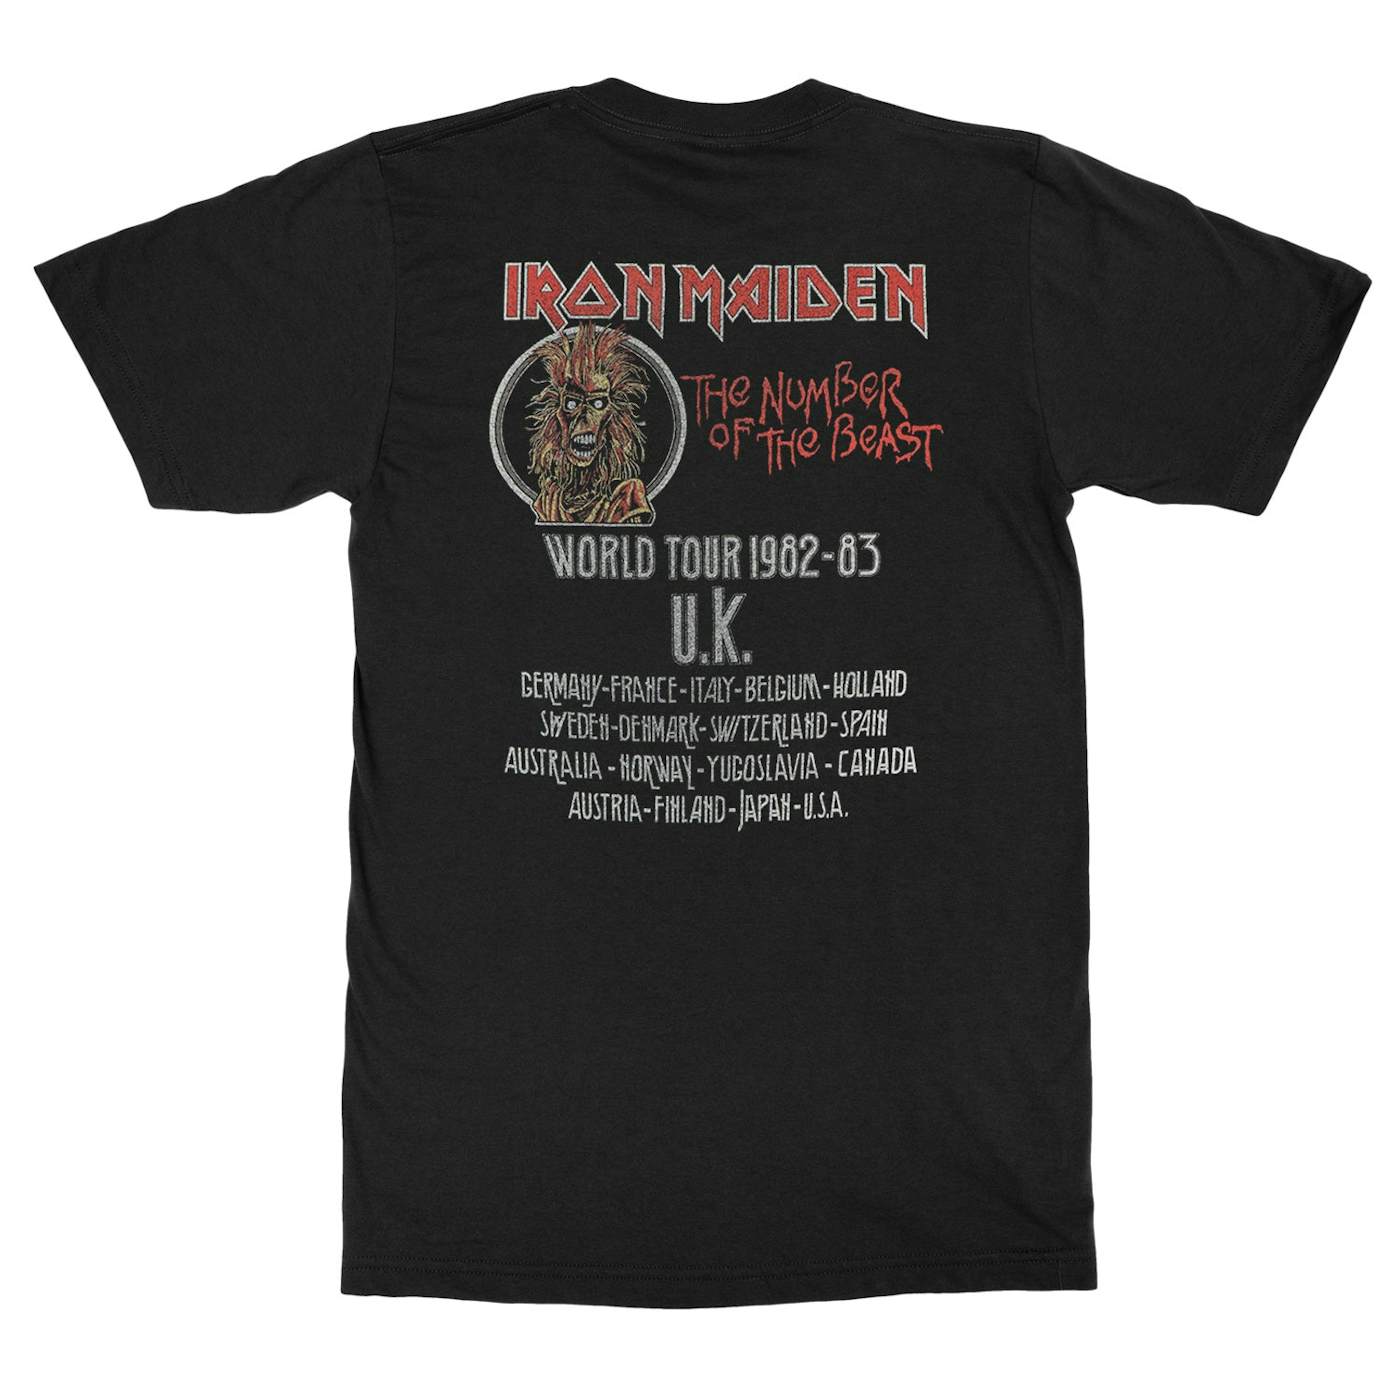 Iron Maiden "Number Of The Beast World Tour" T-Shirt